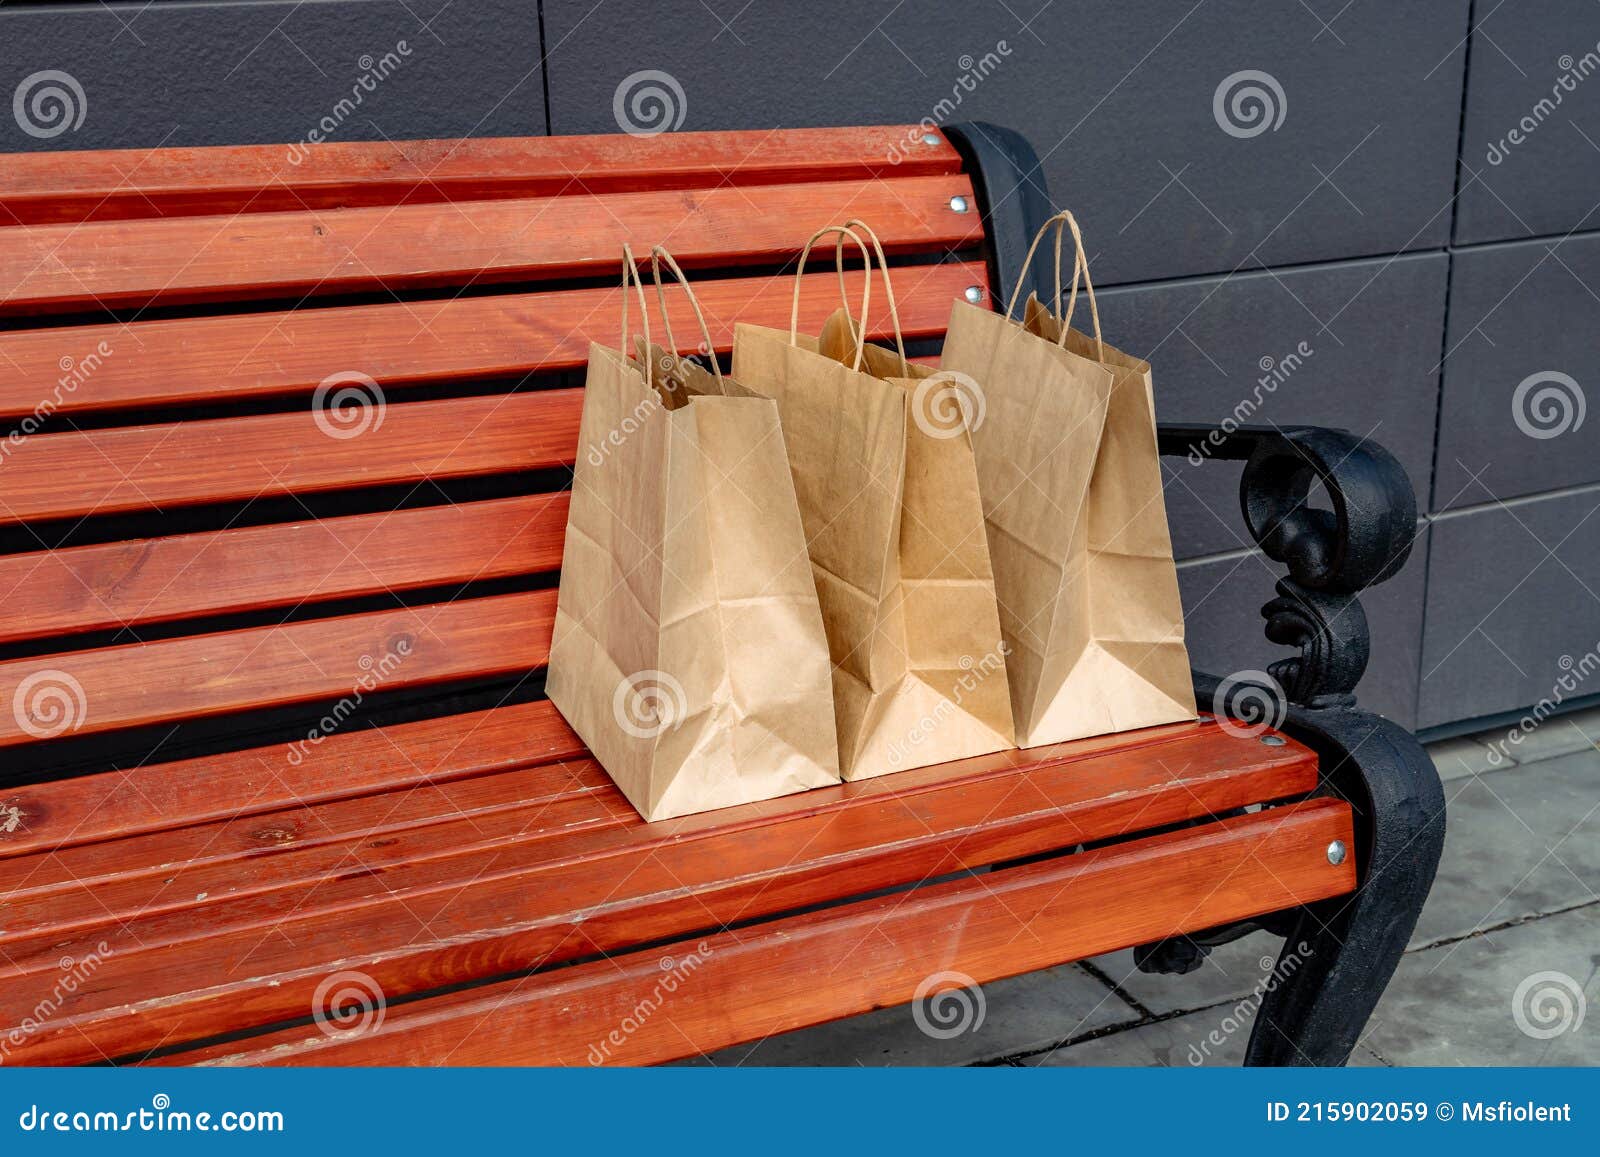 3 Bags Stand On Wooden Shelf Stock Photo 1636188877